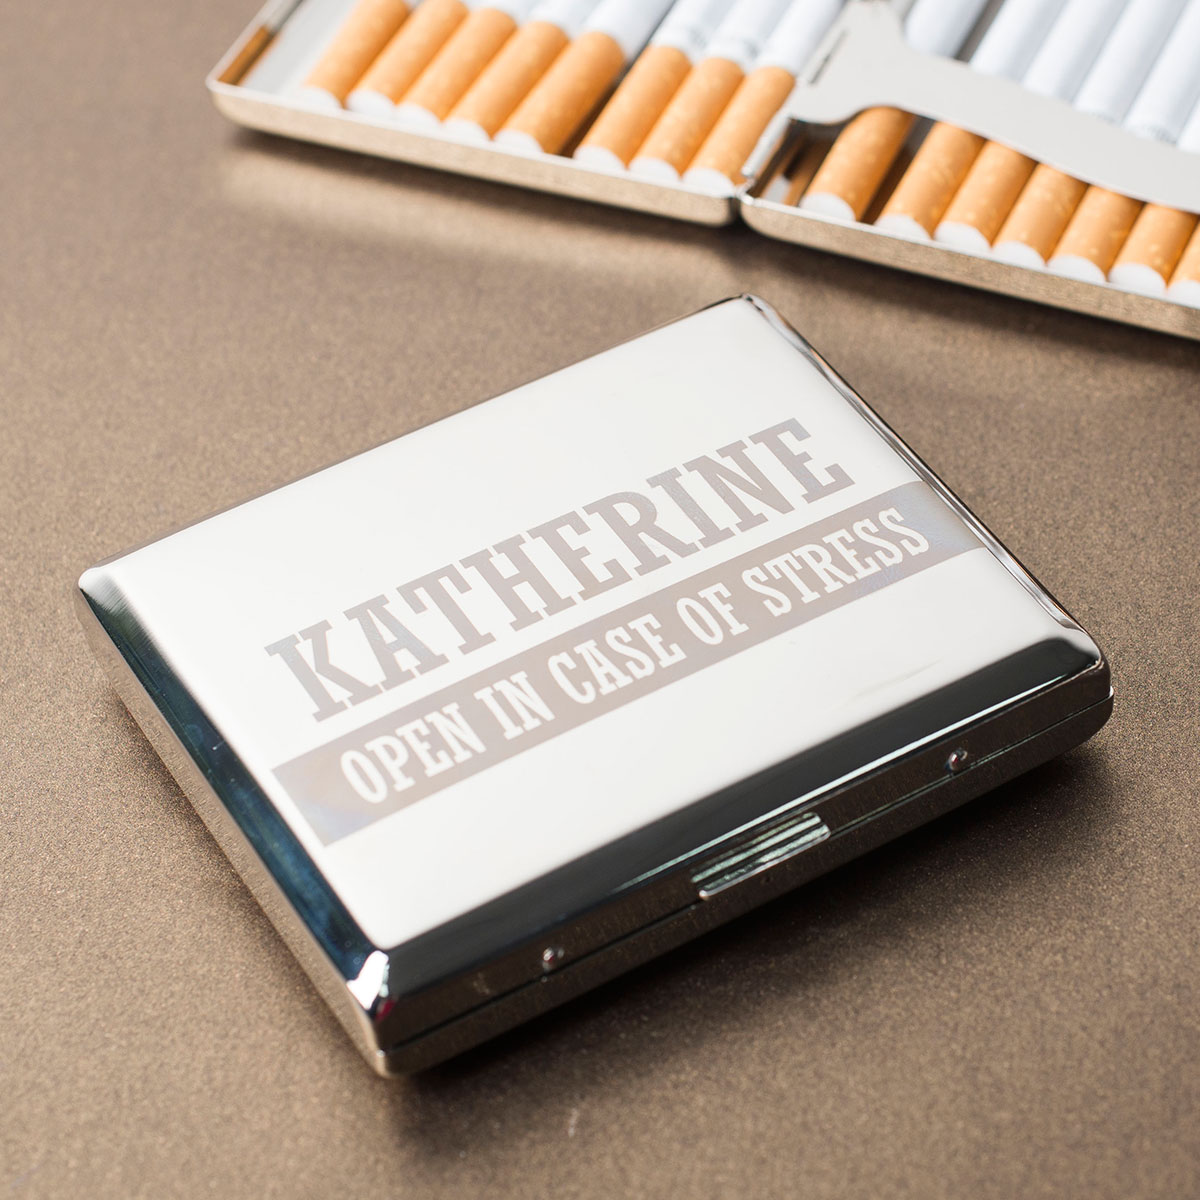 Engraved Cigarette Case - Open In Case Of Stress